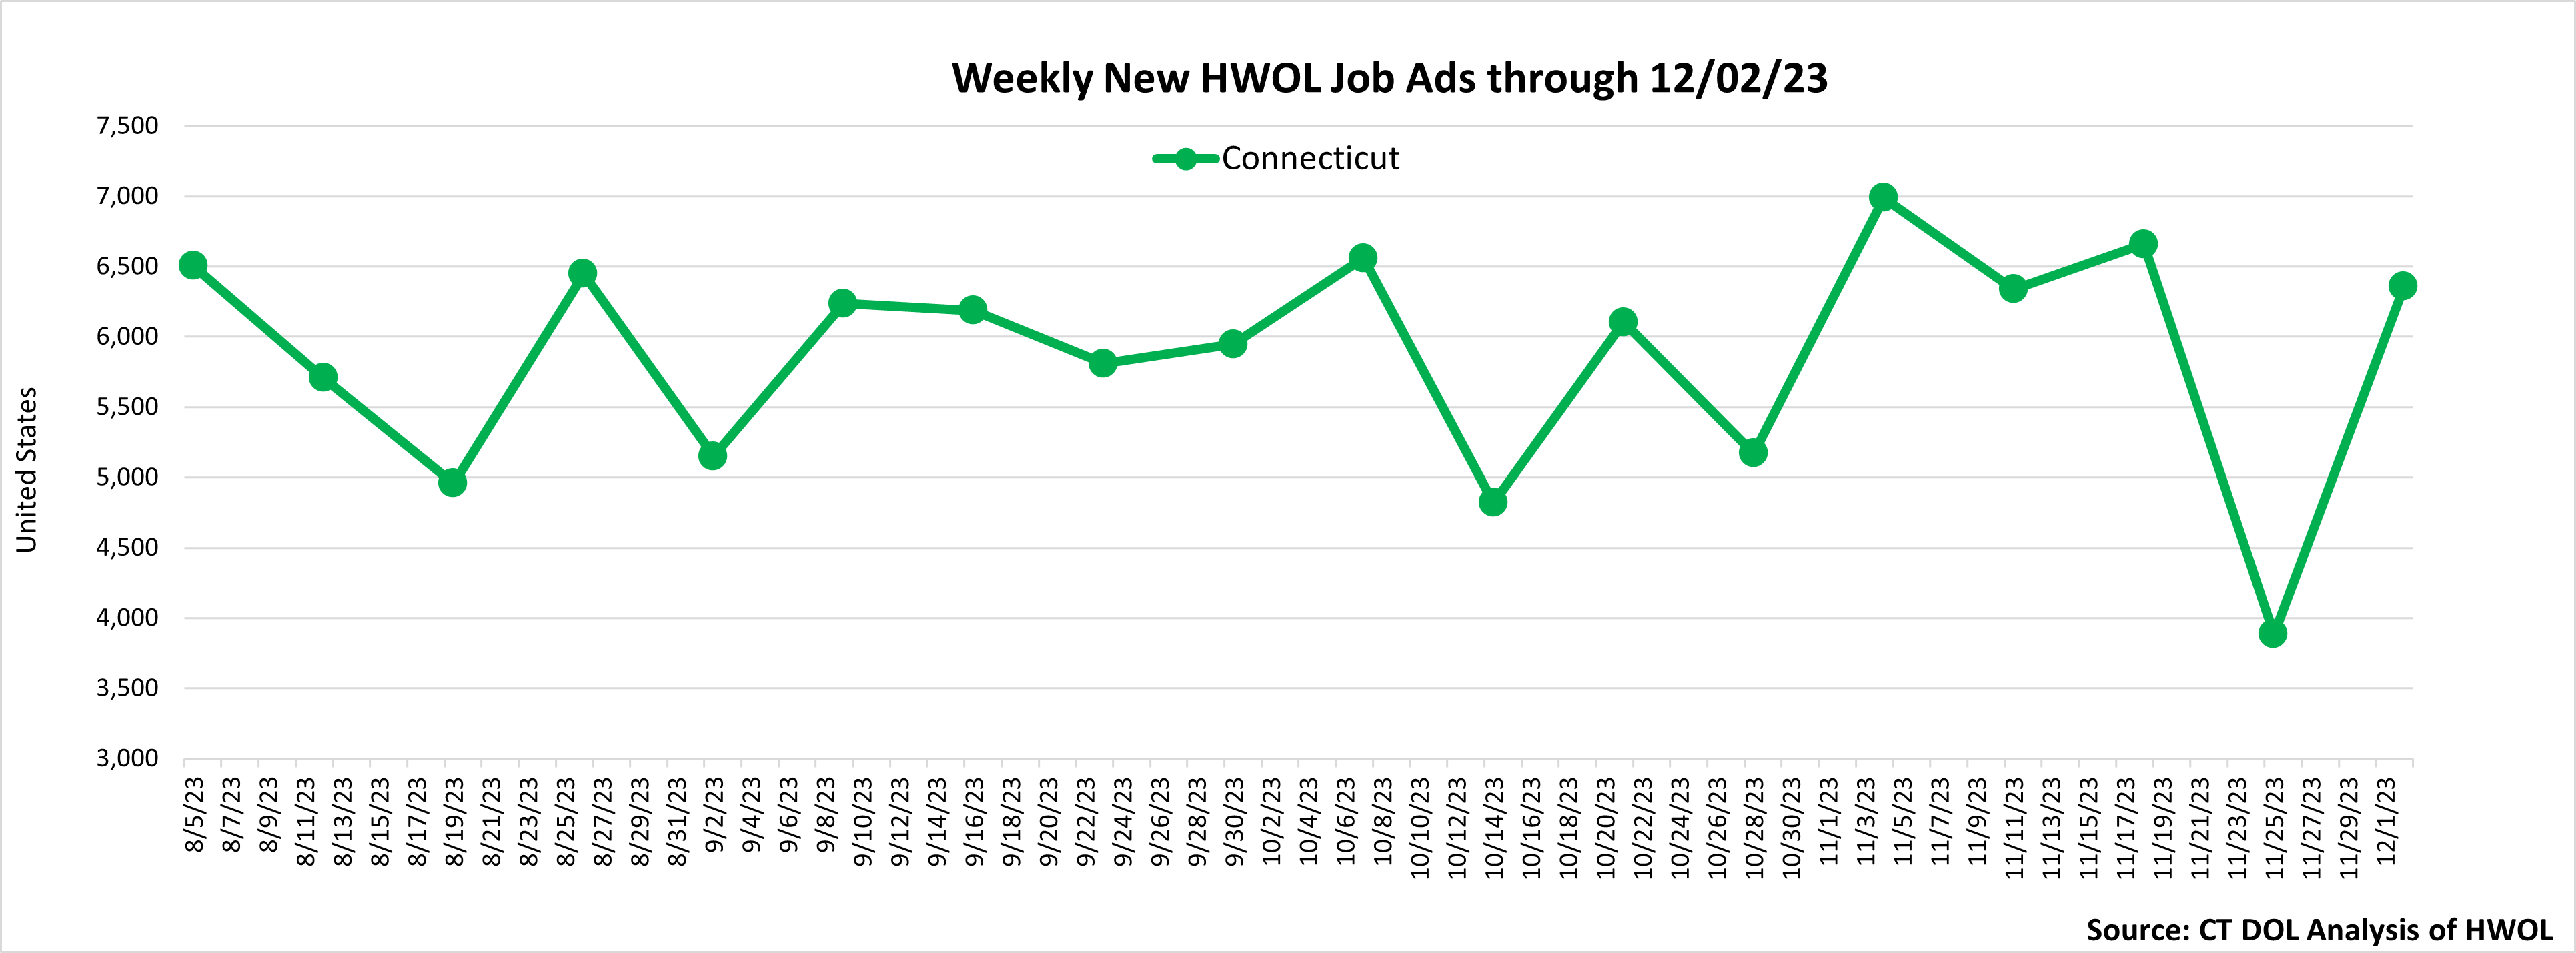 Connecticut Weekly Statewide New HWOL Job Ads through 12/08/23